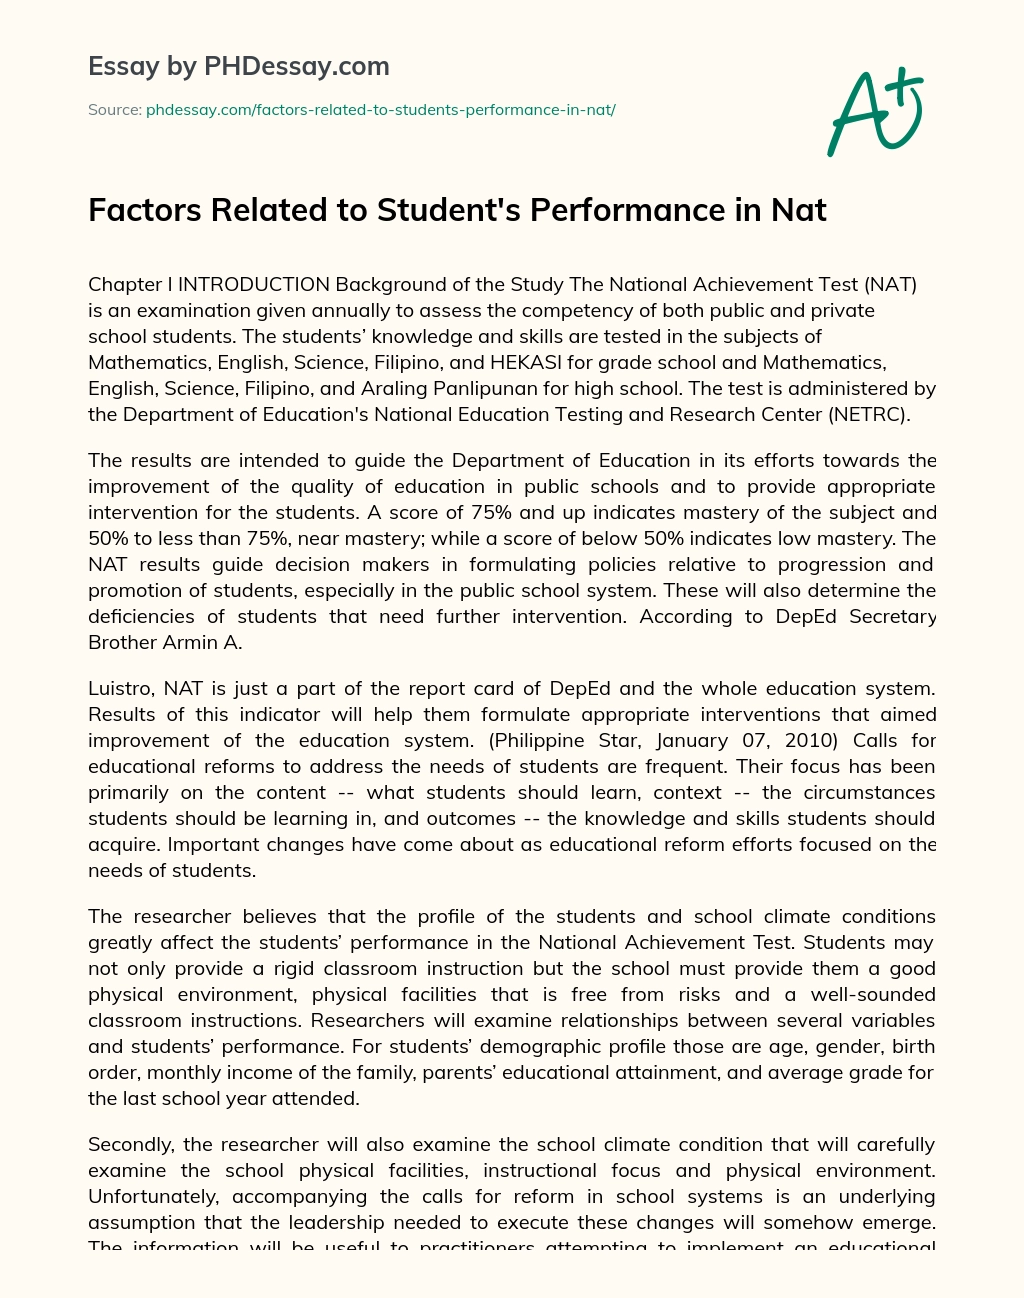 Factors Related to Student’s Performance in Nat essay